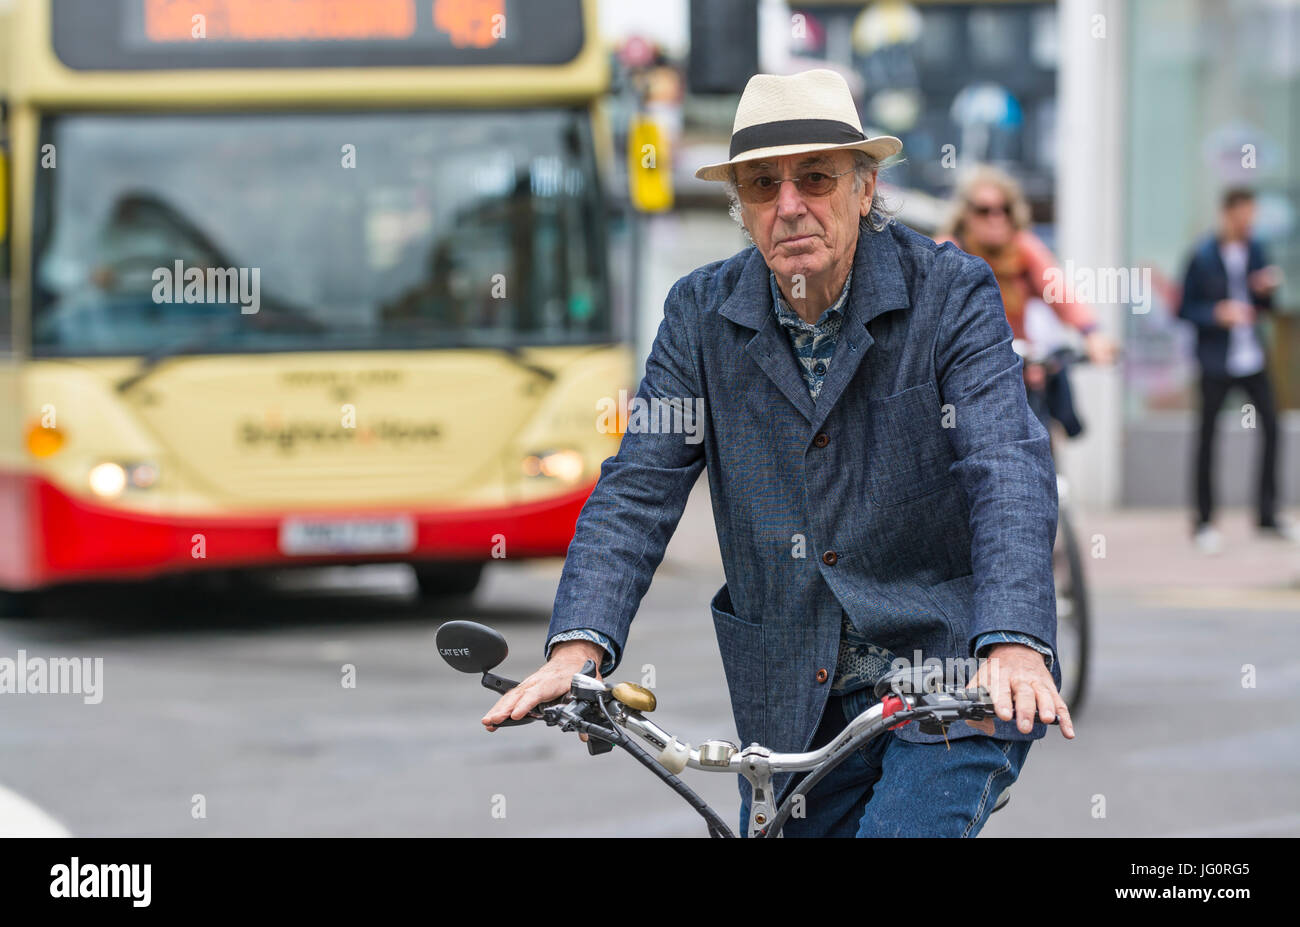 Stylish suave looking middle aged to older man in a summer hat and denim outfit cycling on a busy road. Stock Photo